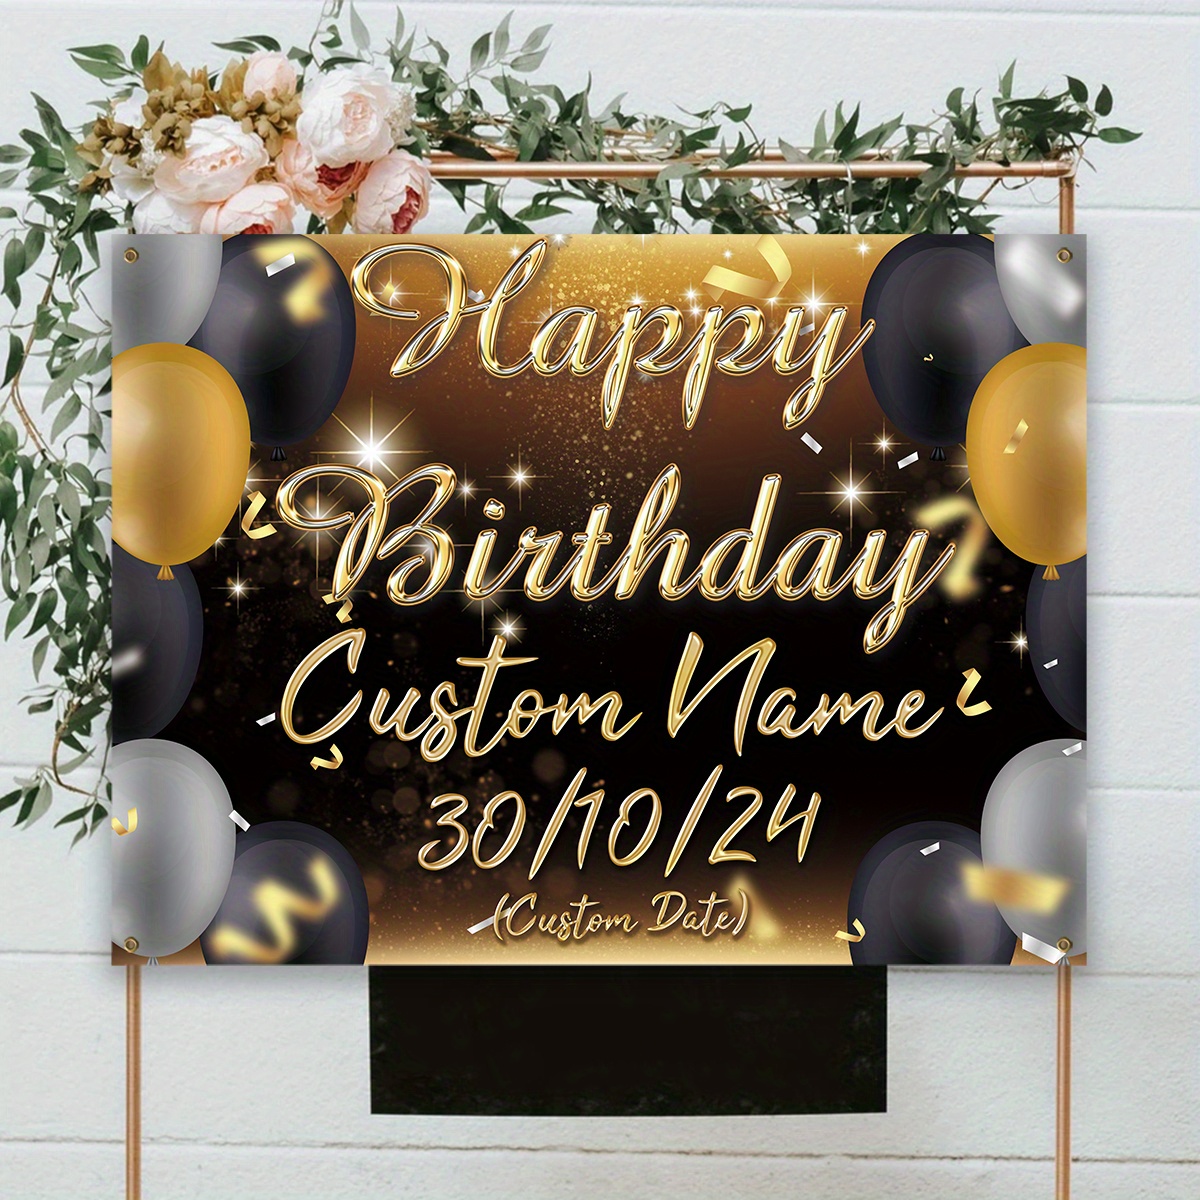 

Custom Happy Birthday Banner - Large Polyester Backdrop With Name & Date, Golden Finish, Perfect For Photo Booths & Party Decorations Birthday Party Decorations Birthday Decor